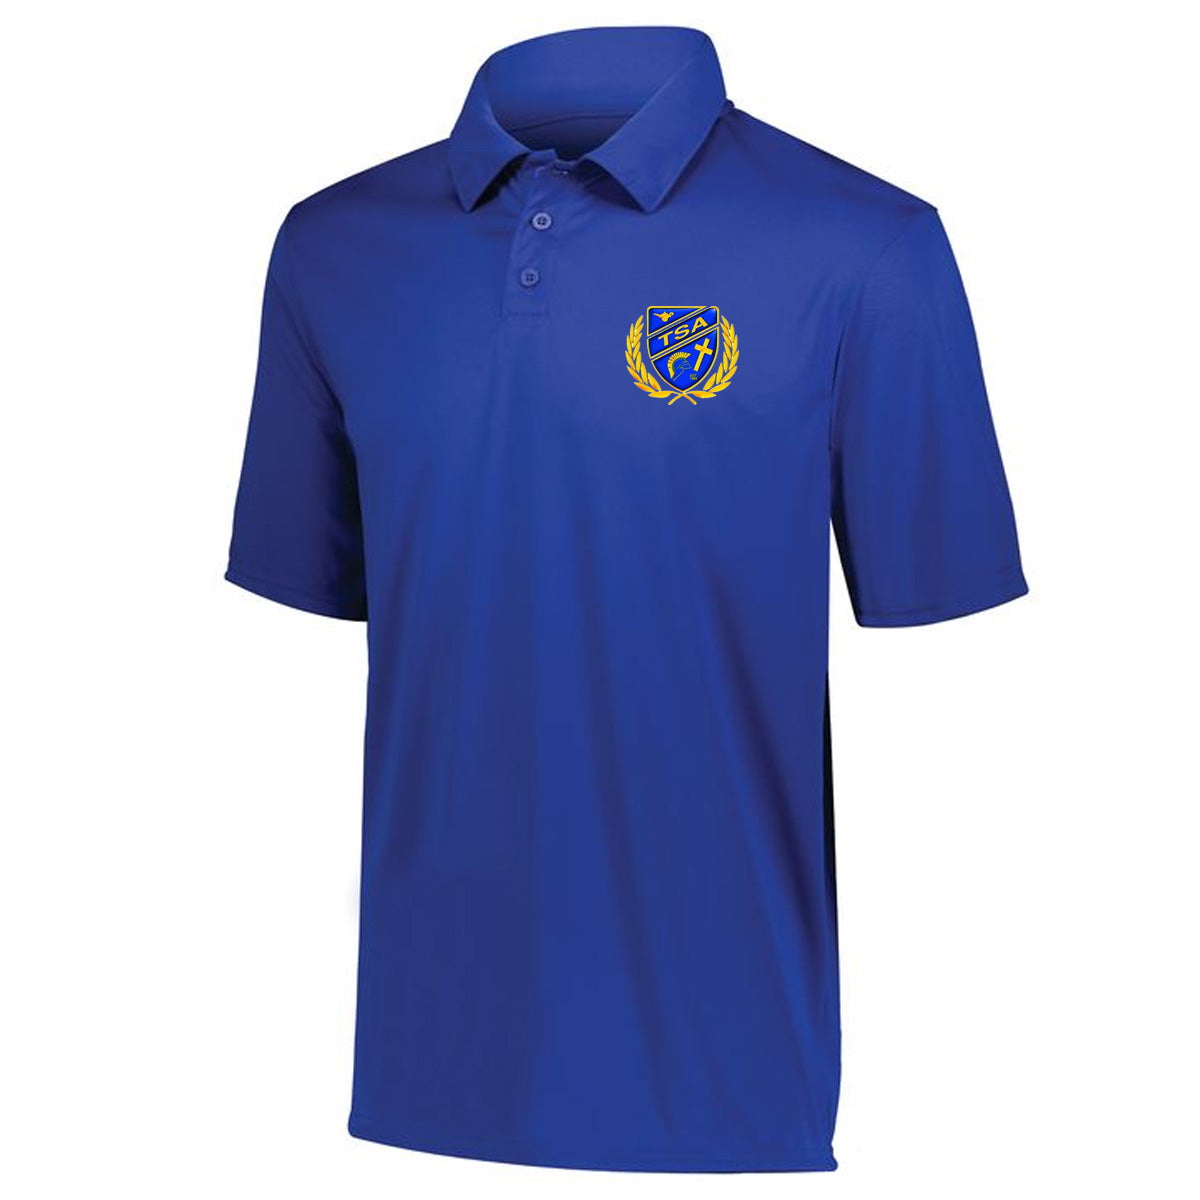 Tattnall - Youth DriFit Moisture Wicking Polo with Crest - Royal (5018)